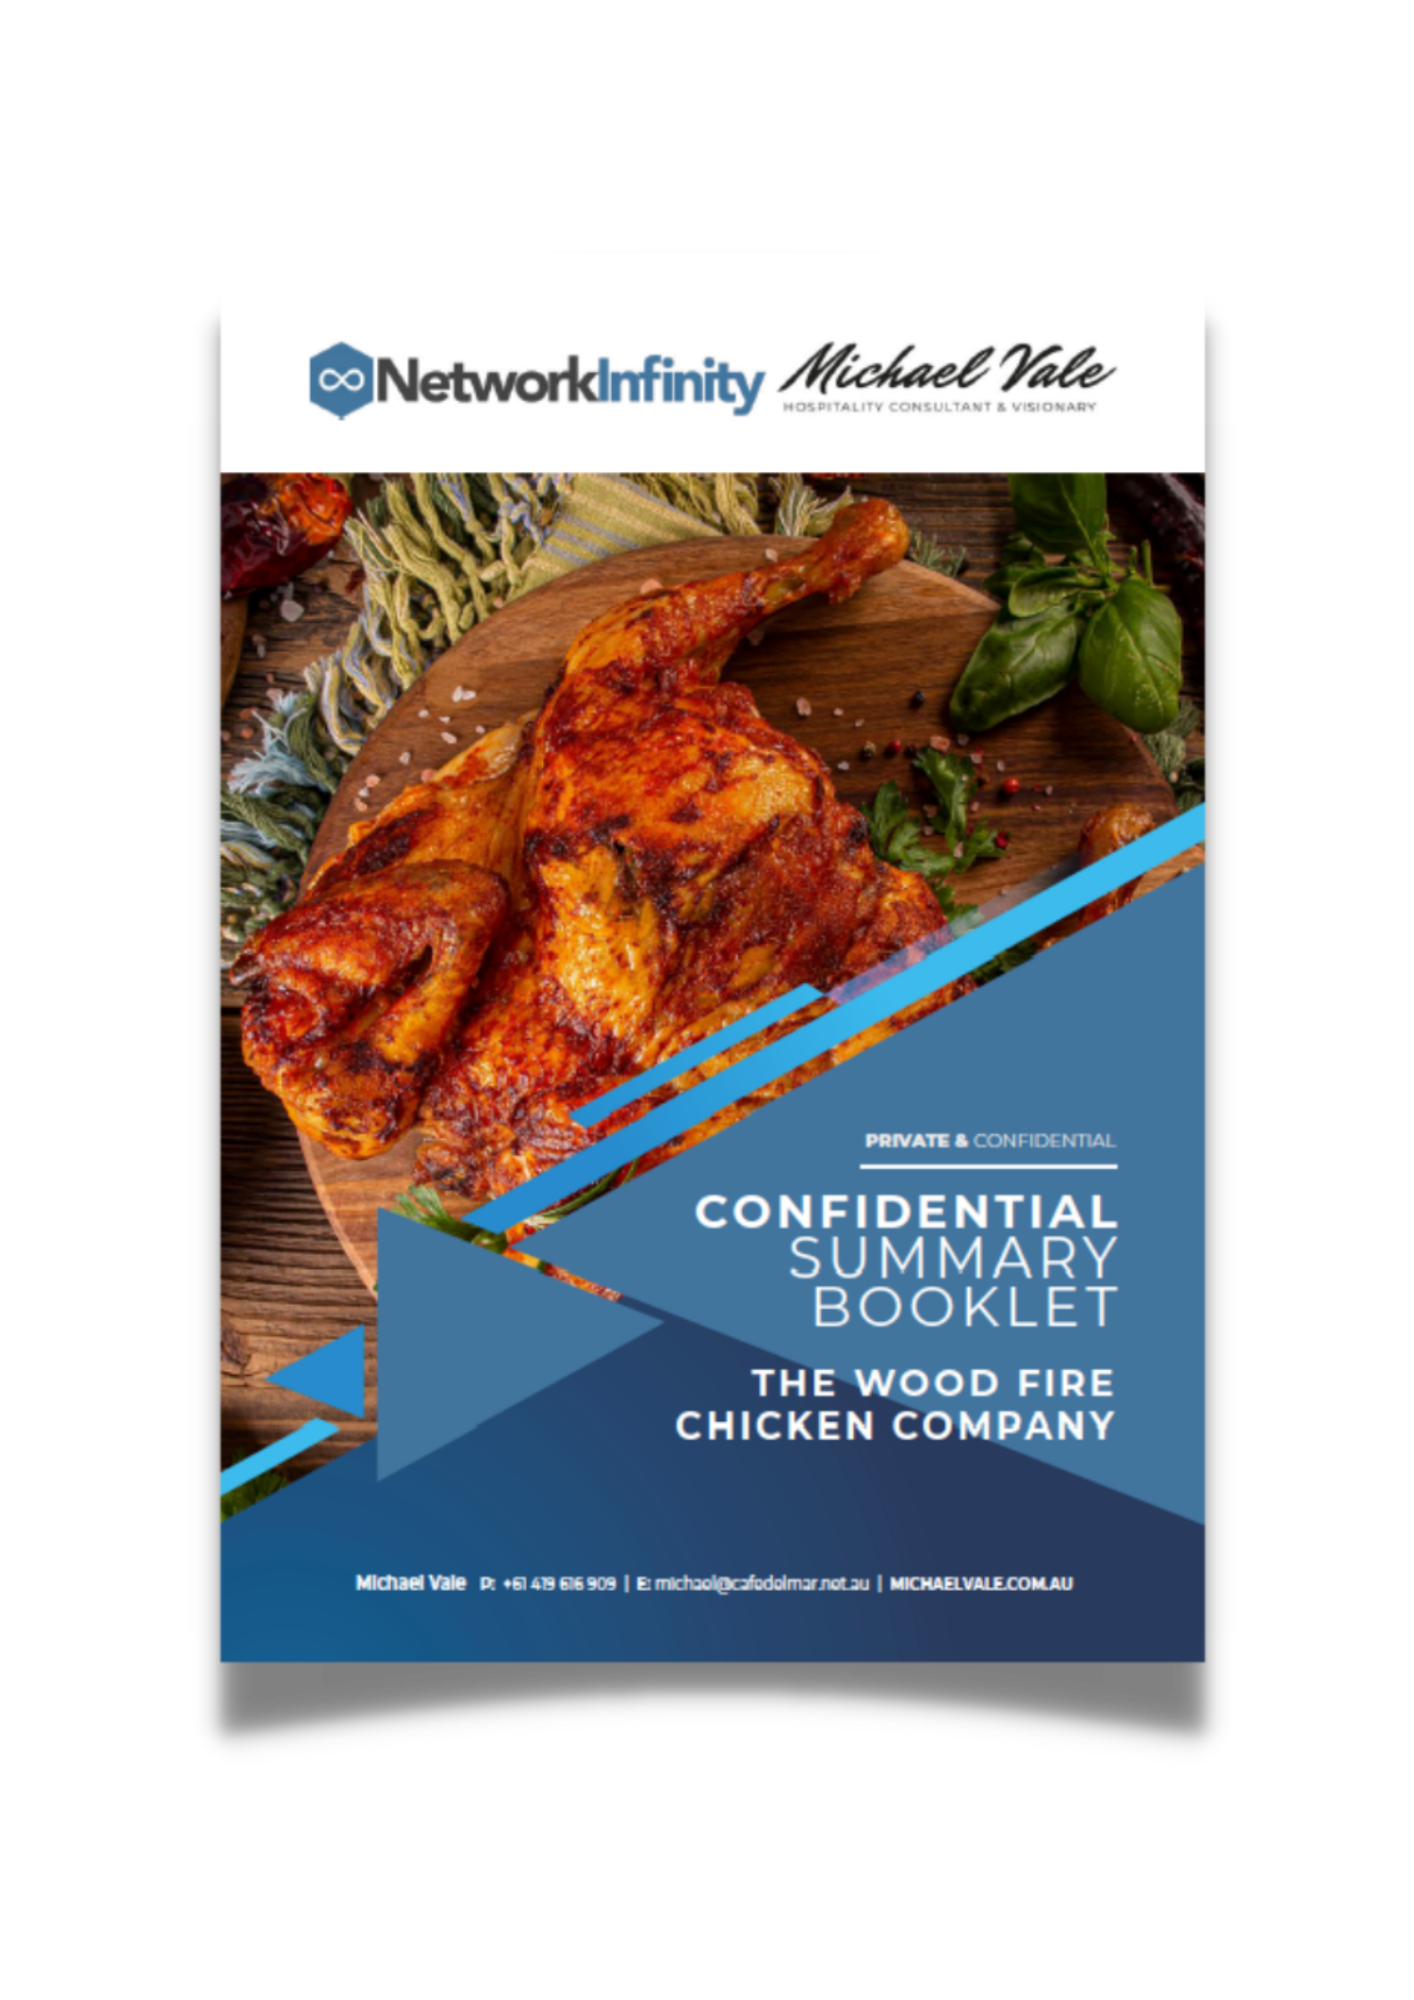 V2_The Wood Fire Chicken Company Confidential Summary Booklet(Medium Resolution)